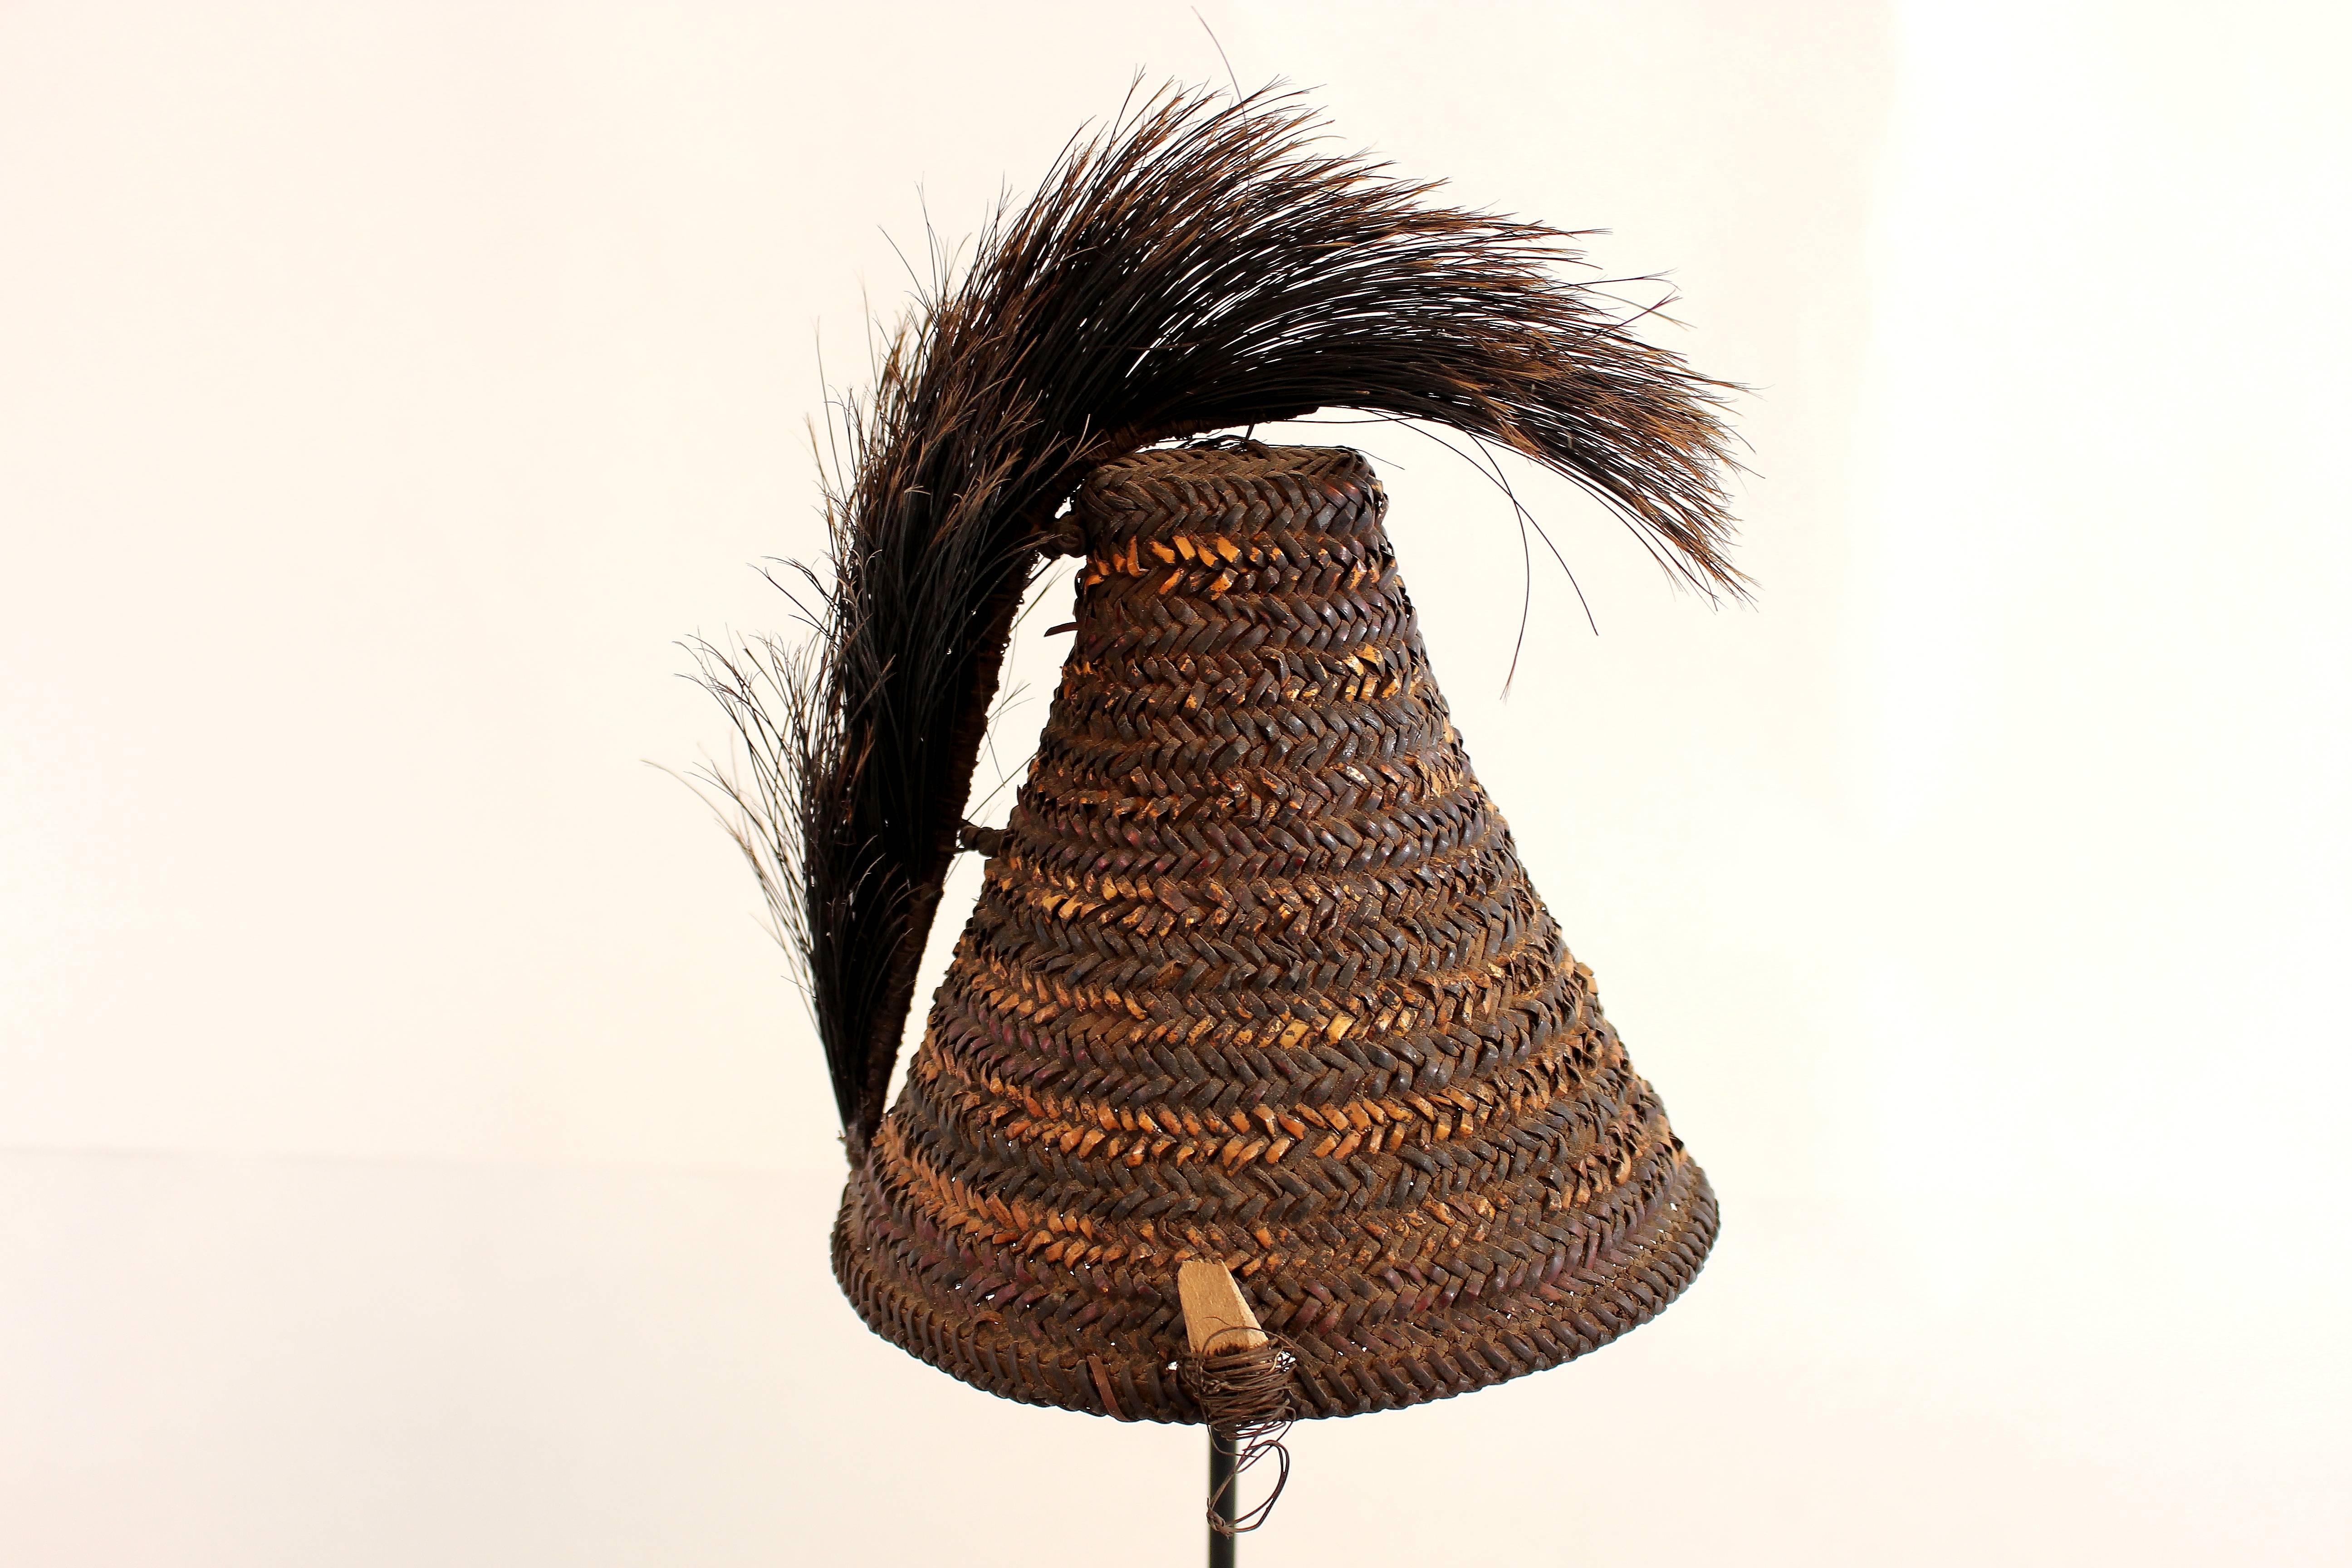 20th Century Naga Warrior’s Hat with Boar’s Tusk and Fur Plume